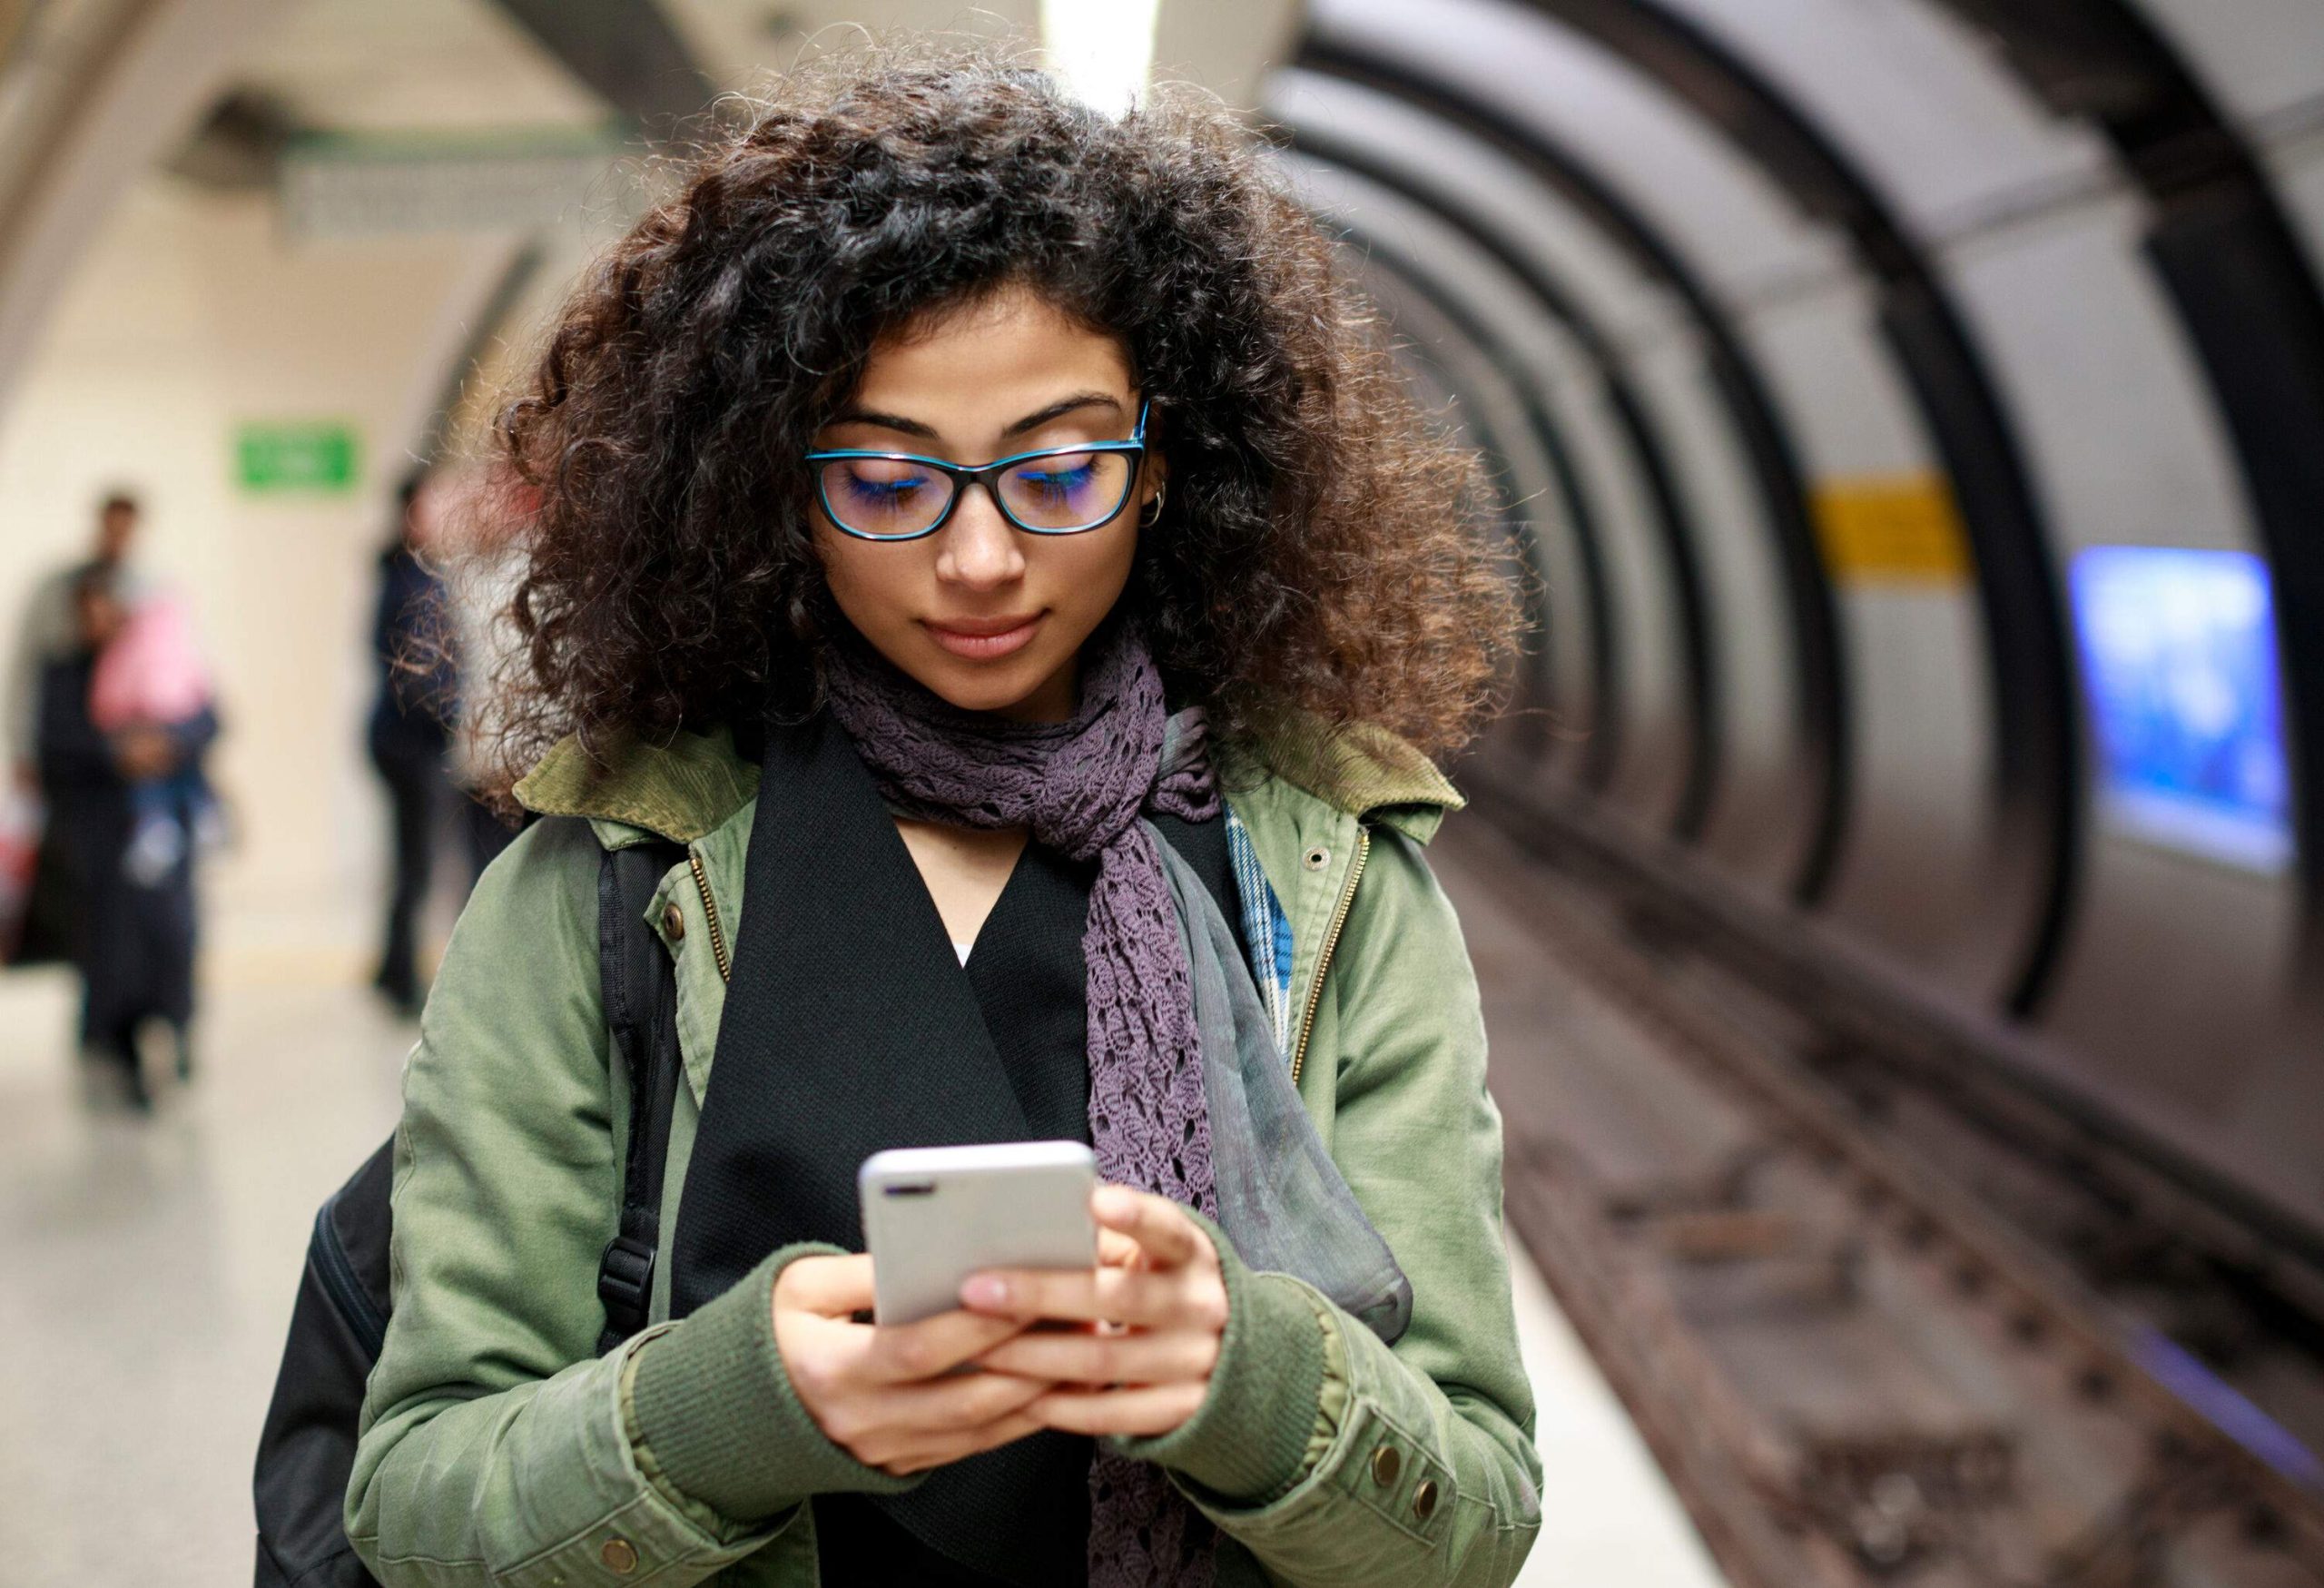 A young lady uses her mobile phone while in a subway station.